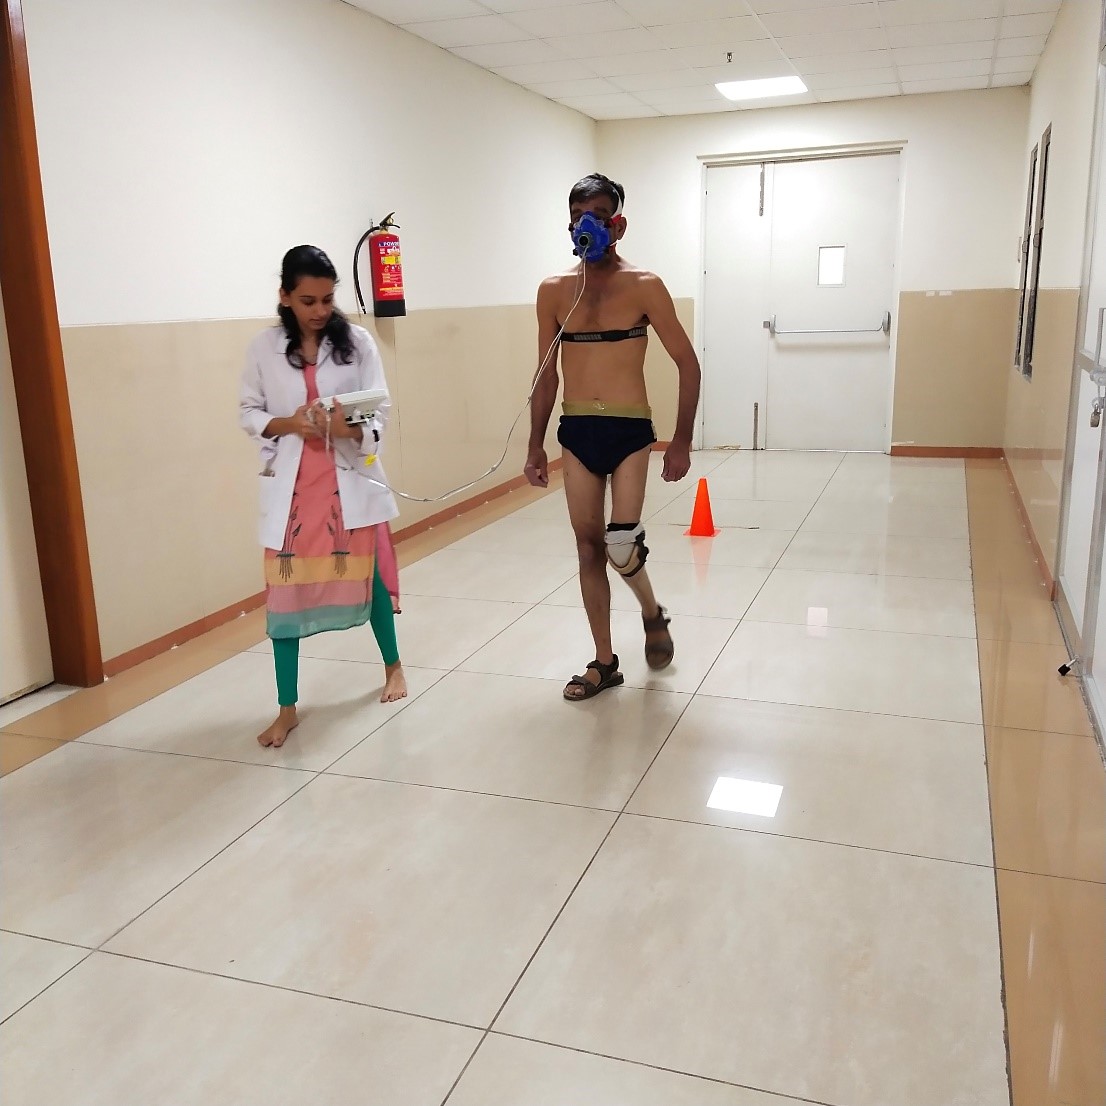 Gait capacity assessment along with energy expenditure of patient with Below knee amputation